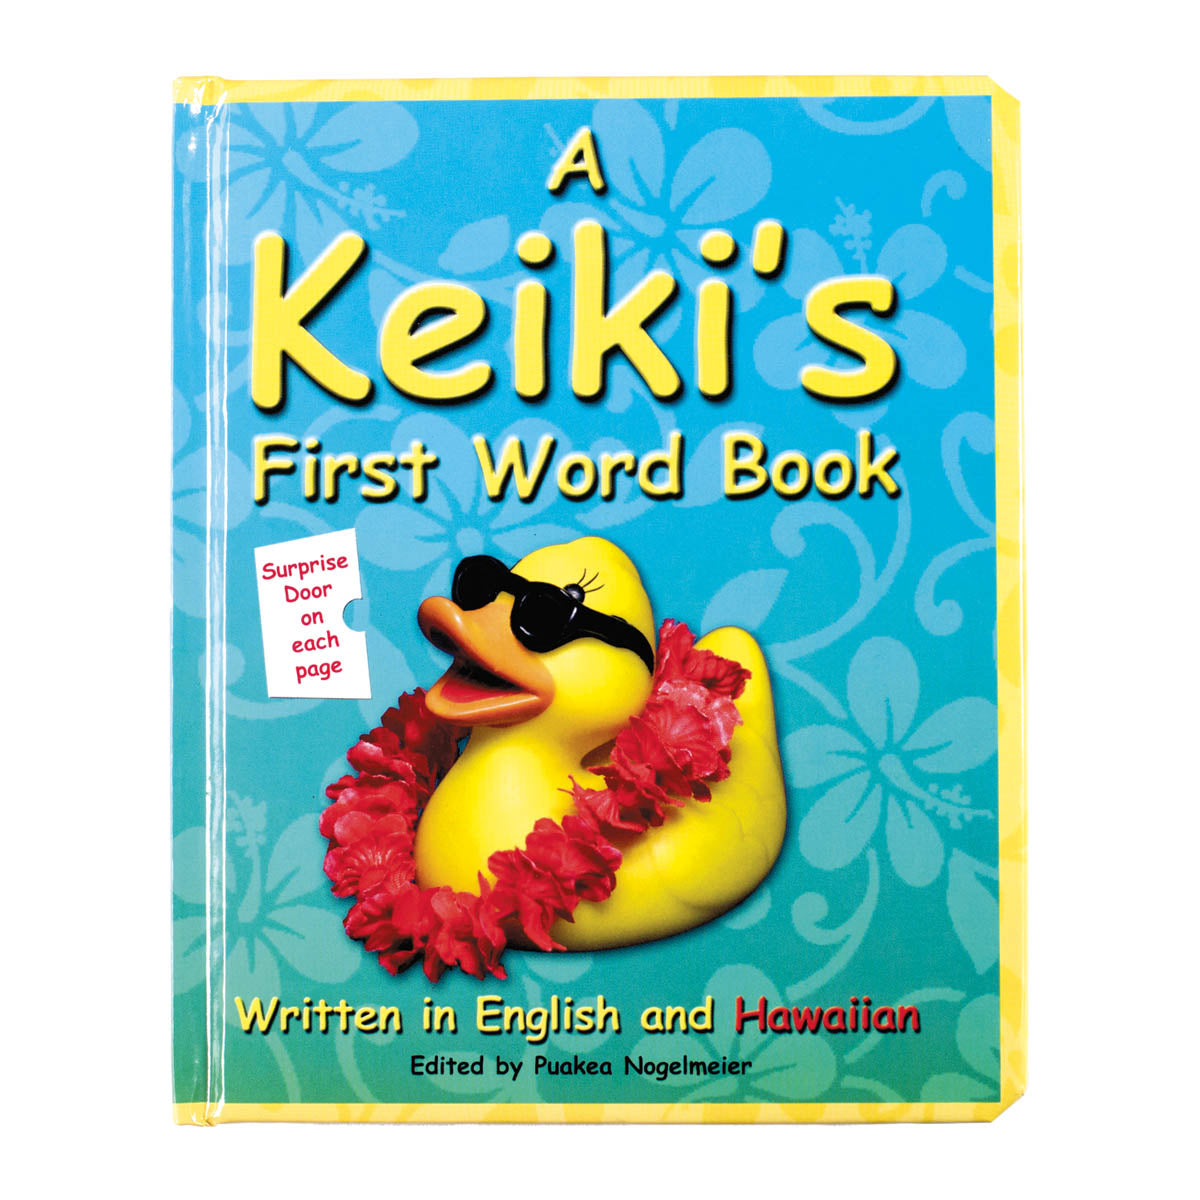 A Keiki's First Word Book